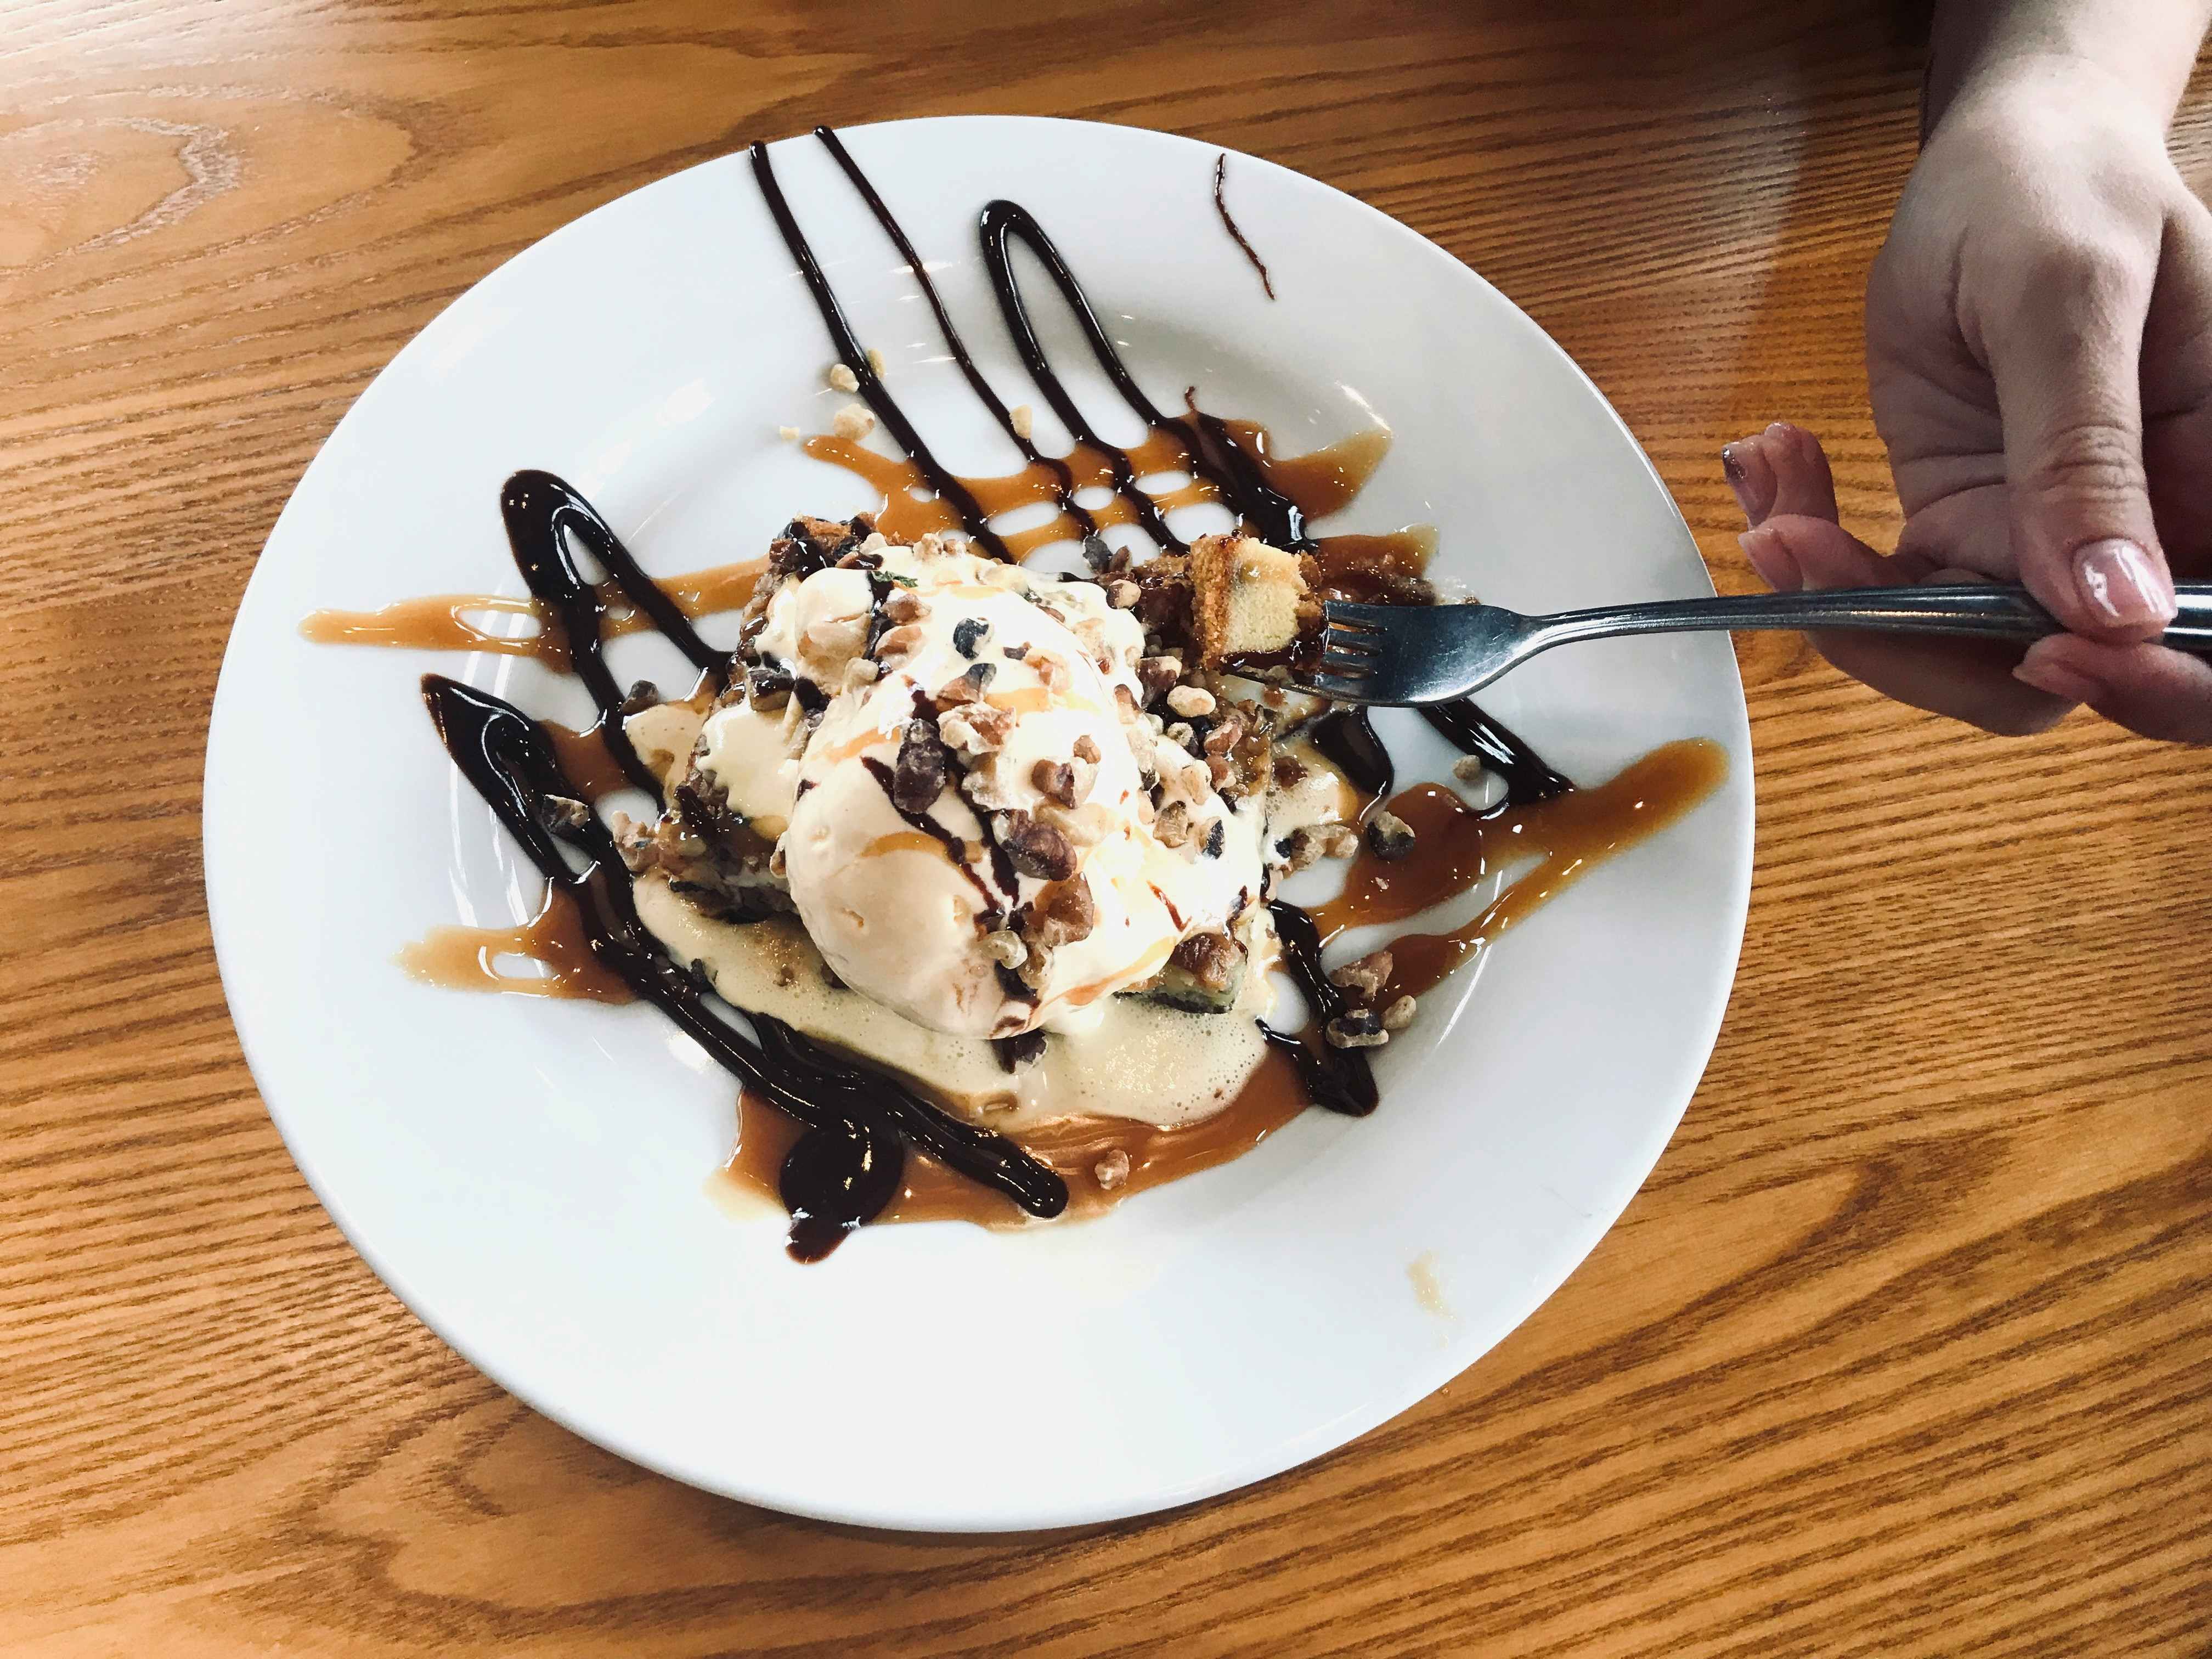 A person's hand using a fork to take some of the plated dessert on the table at Chili's.